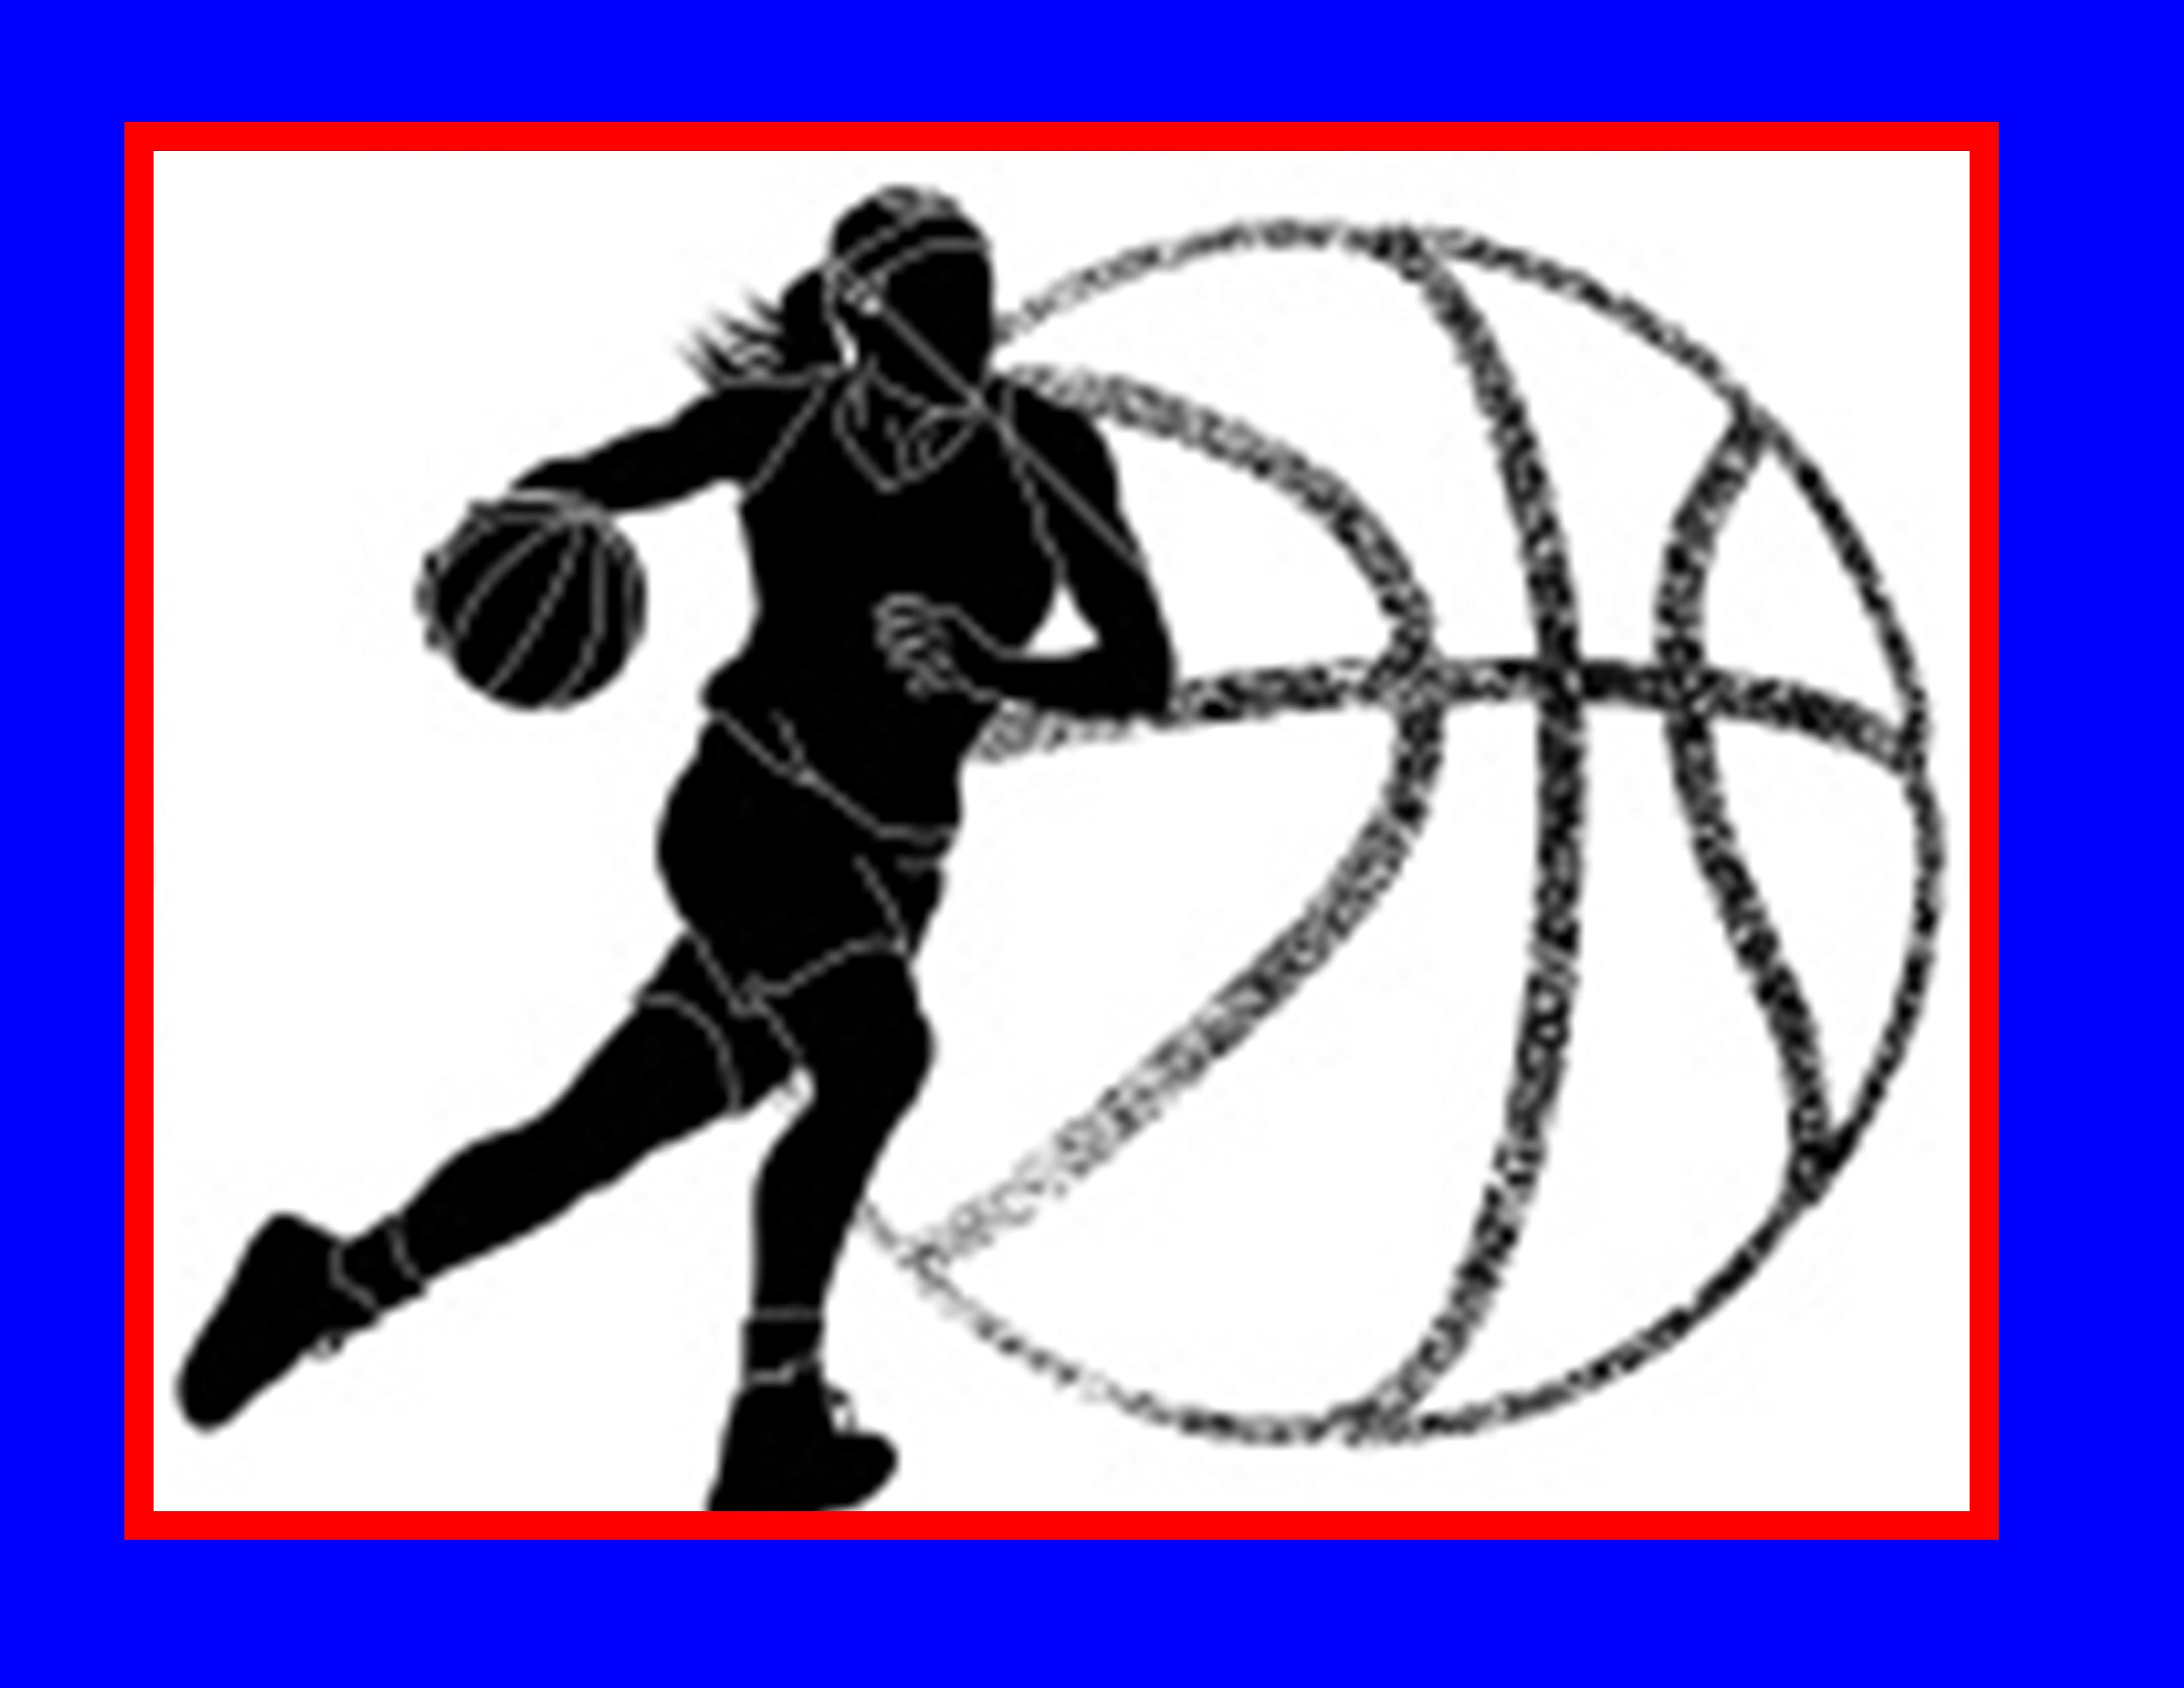 add-a-touch-of-professionalism-to-your-team-with-basketball-logo-cliparts